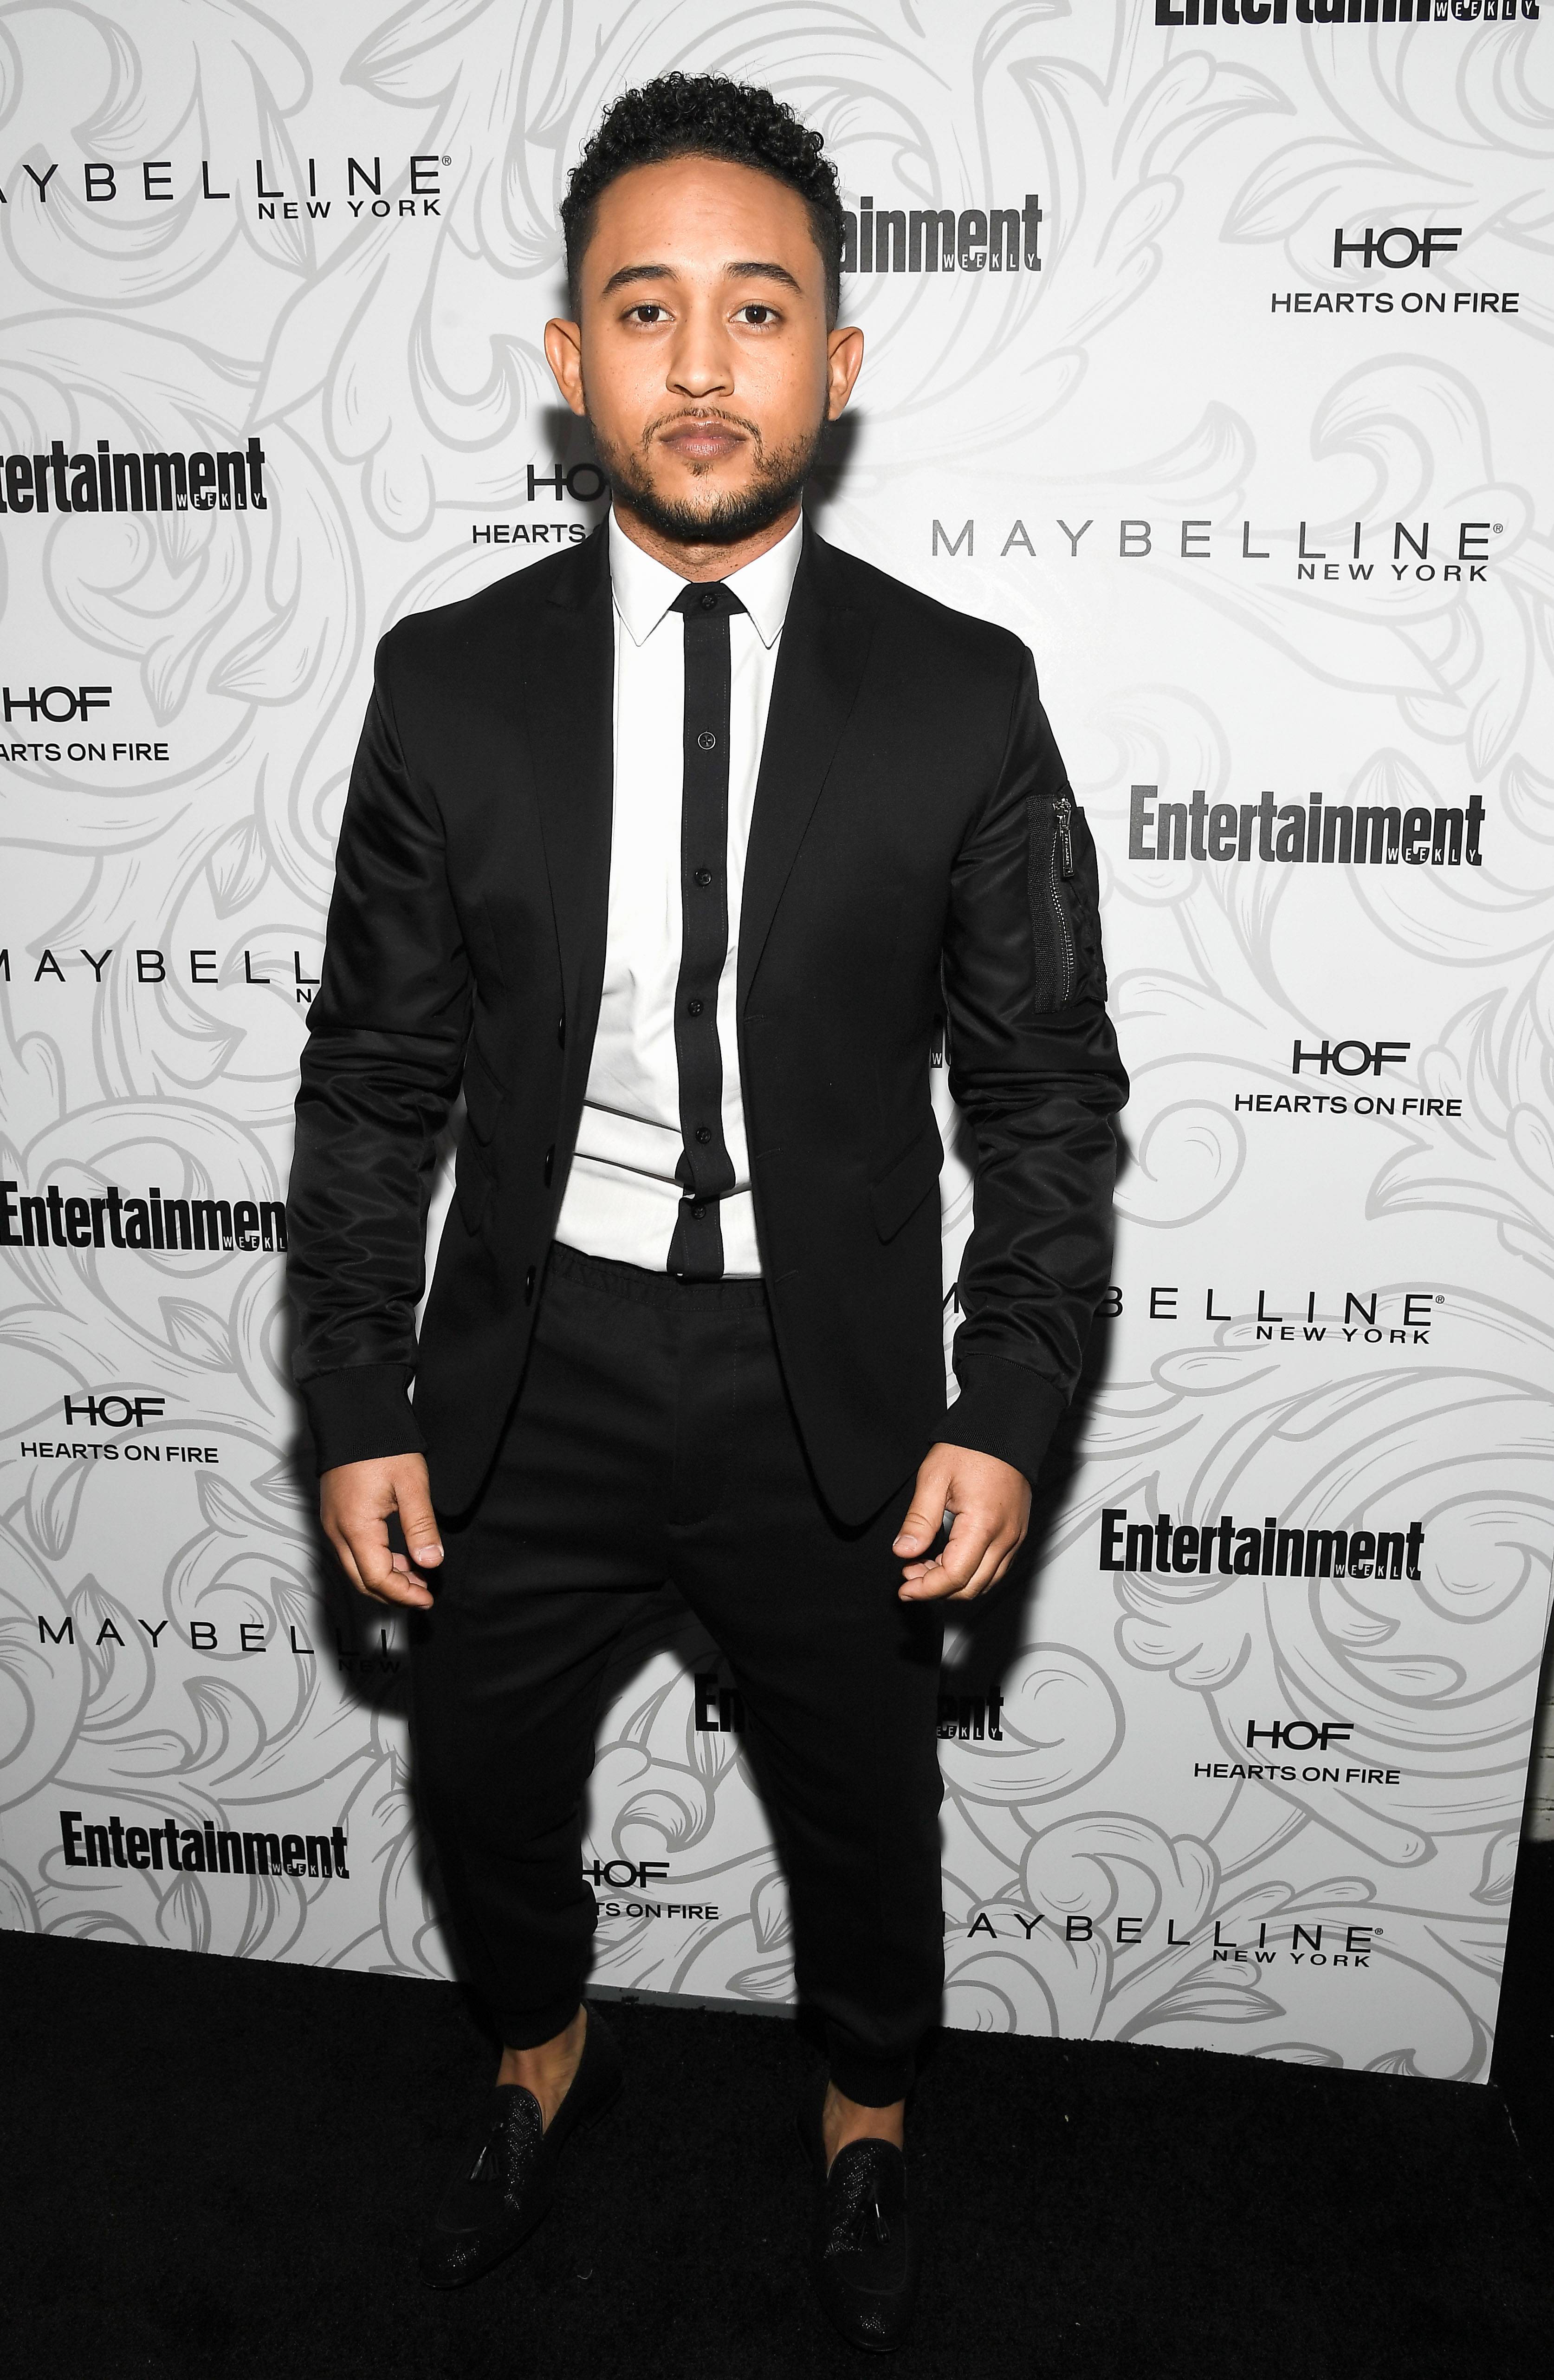 LOS ANGELES, CA - JANUARY 28:  Actor Tahj Mowry attends the Entertainment Weekly Celebration of SAG Award Nominees sponsored by Maybelline New York at Chateau Marmont on January 28, 2017 in Los Angeles, California.  (Photo by Frazer Harrison/Getty Images for Entertainment Weekly)